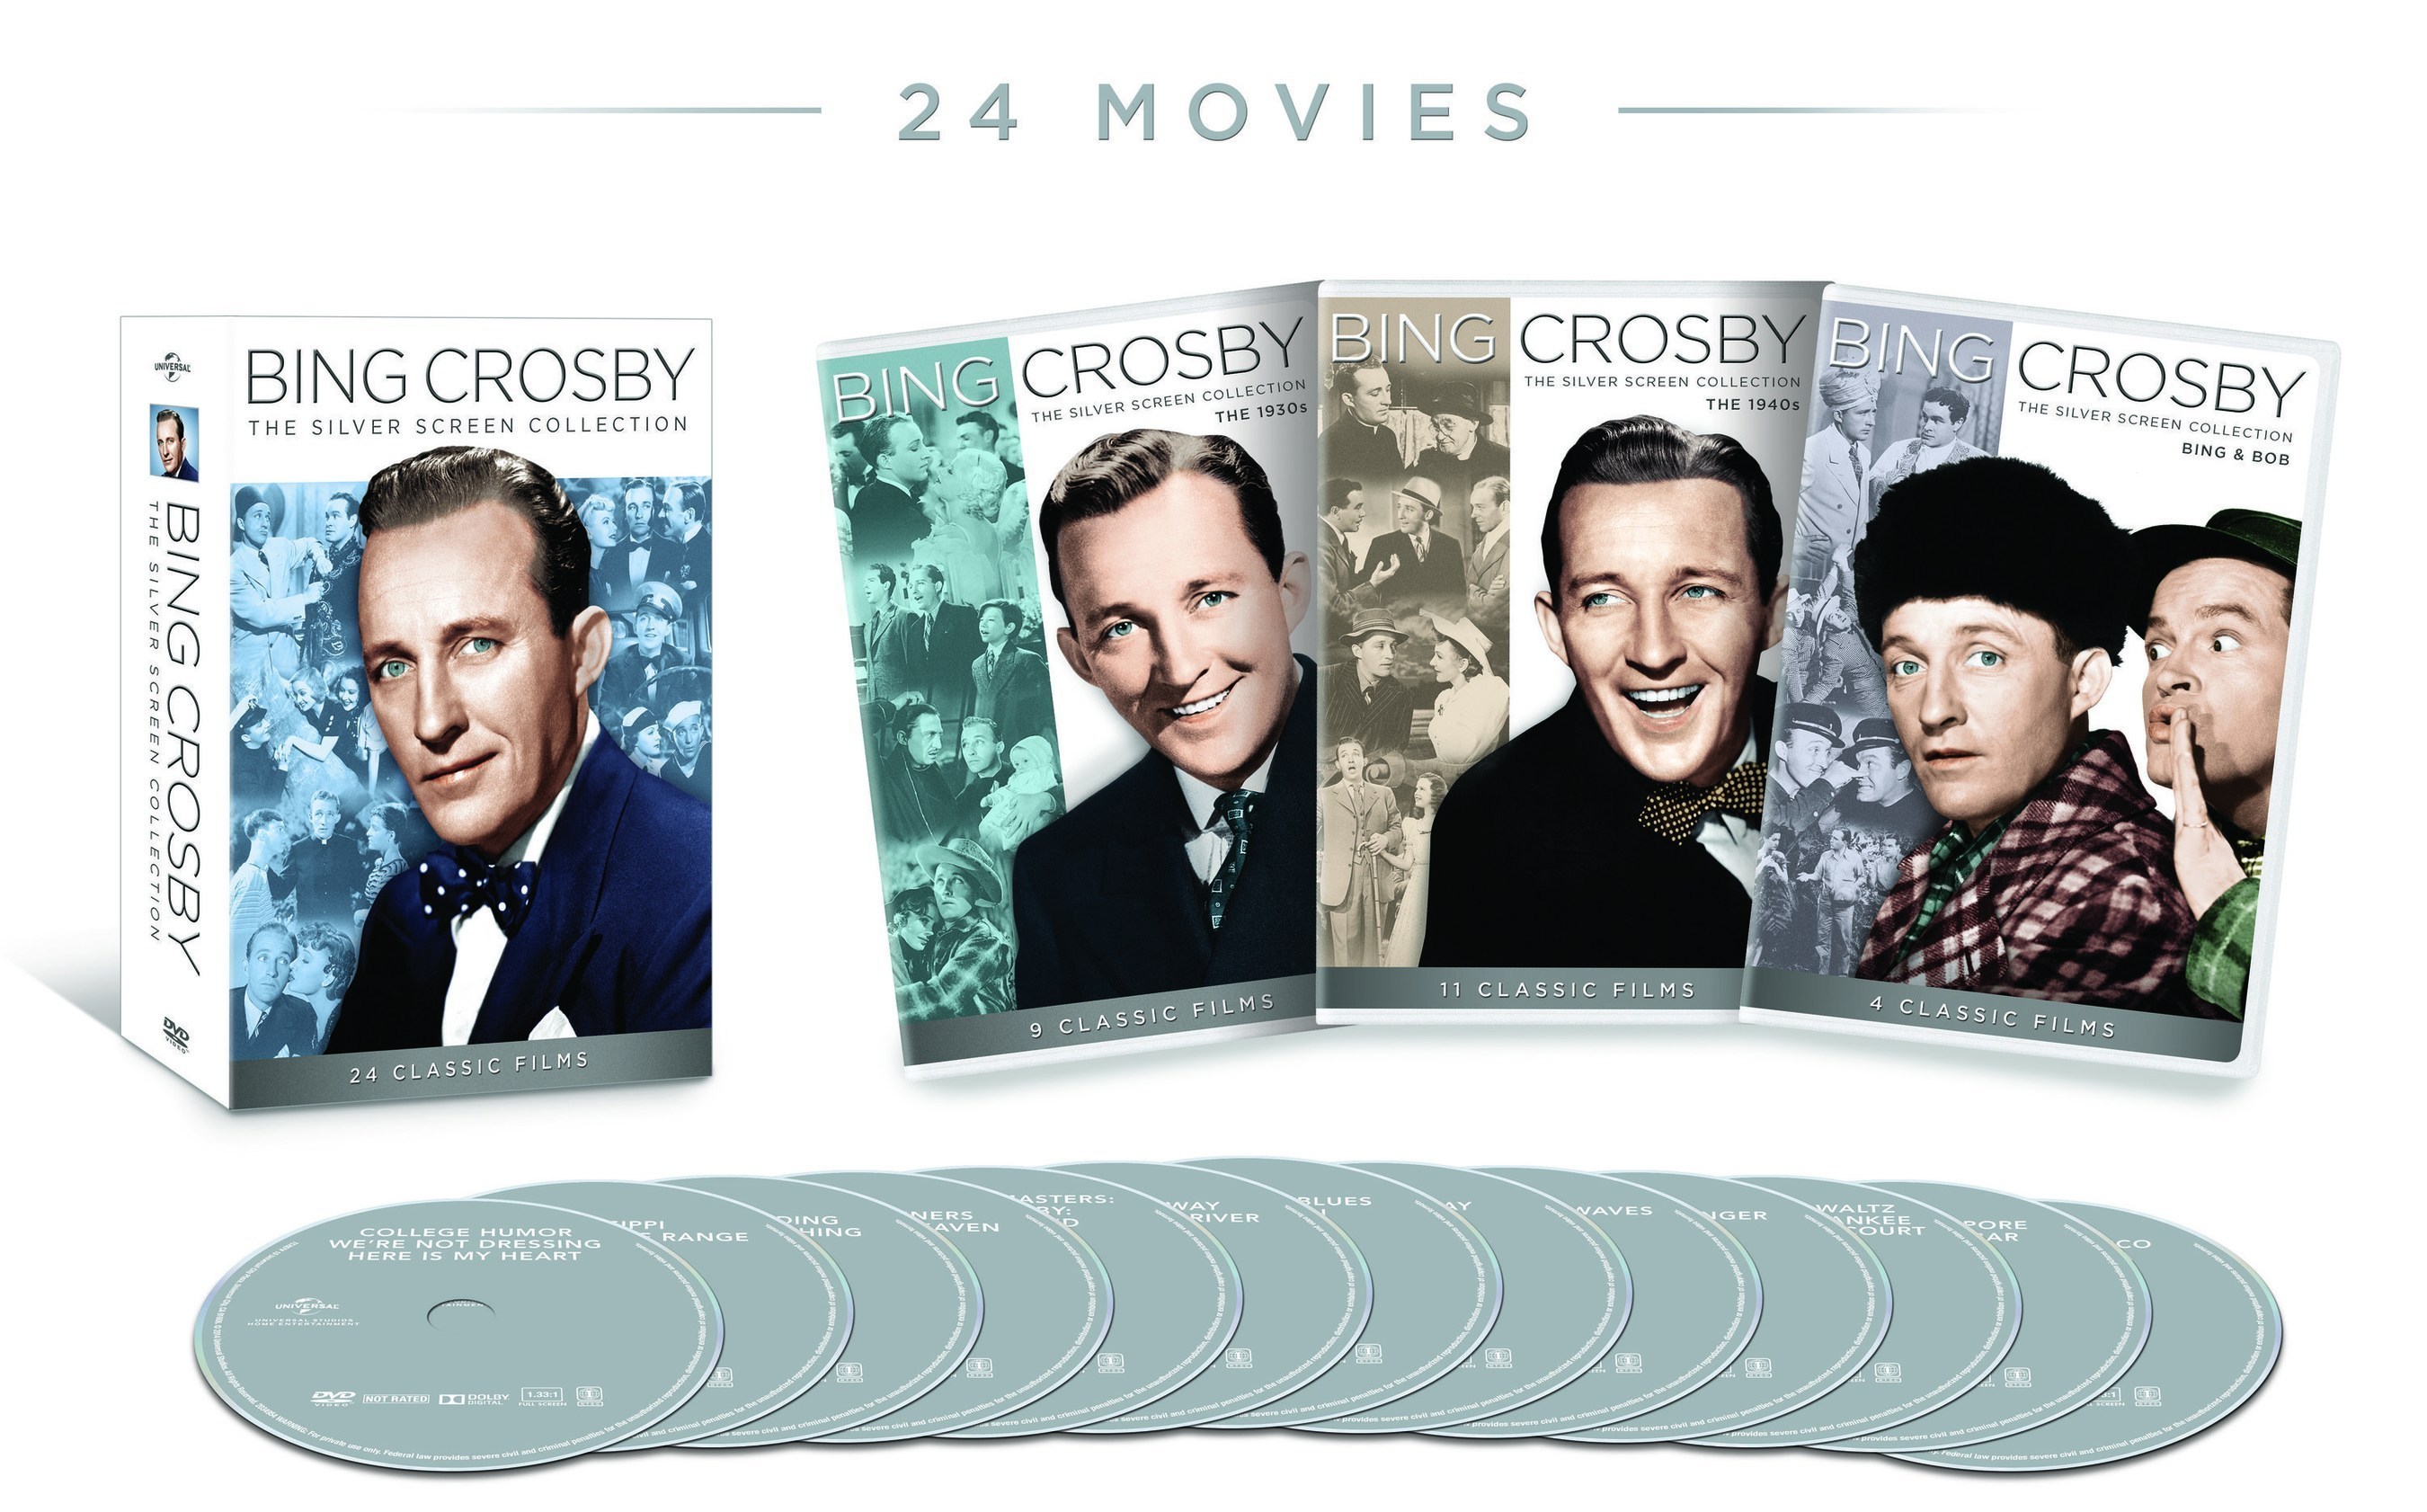 From Universal Studios Home Entertainment: Bing Crosby: The Silver Screen Collection (PRNewsFoto/Universal Studios Home)